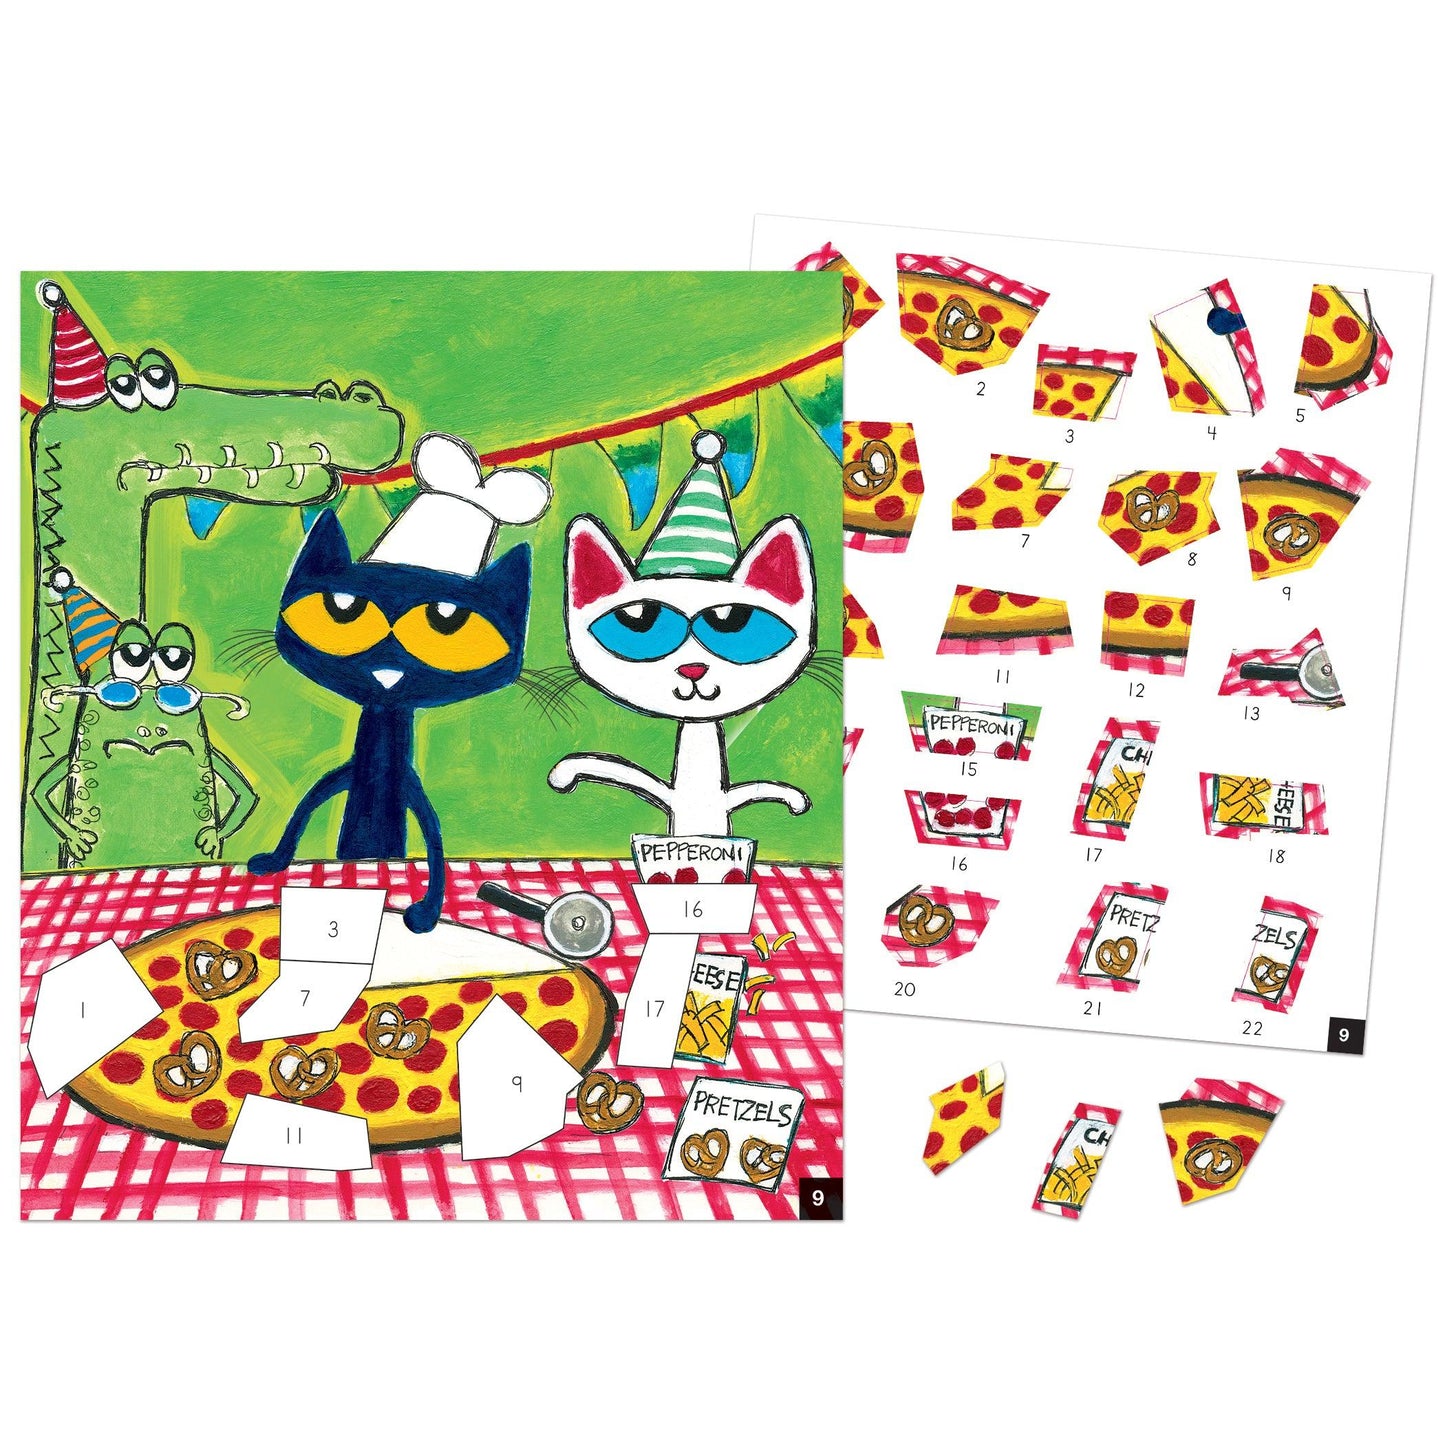 Pete The Cat Modern Mosaics Stick to the Numbers Activity Book, Pack of 2 - Loomini